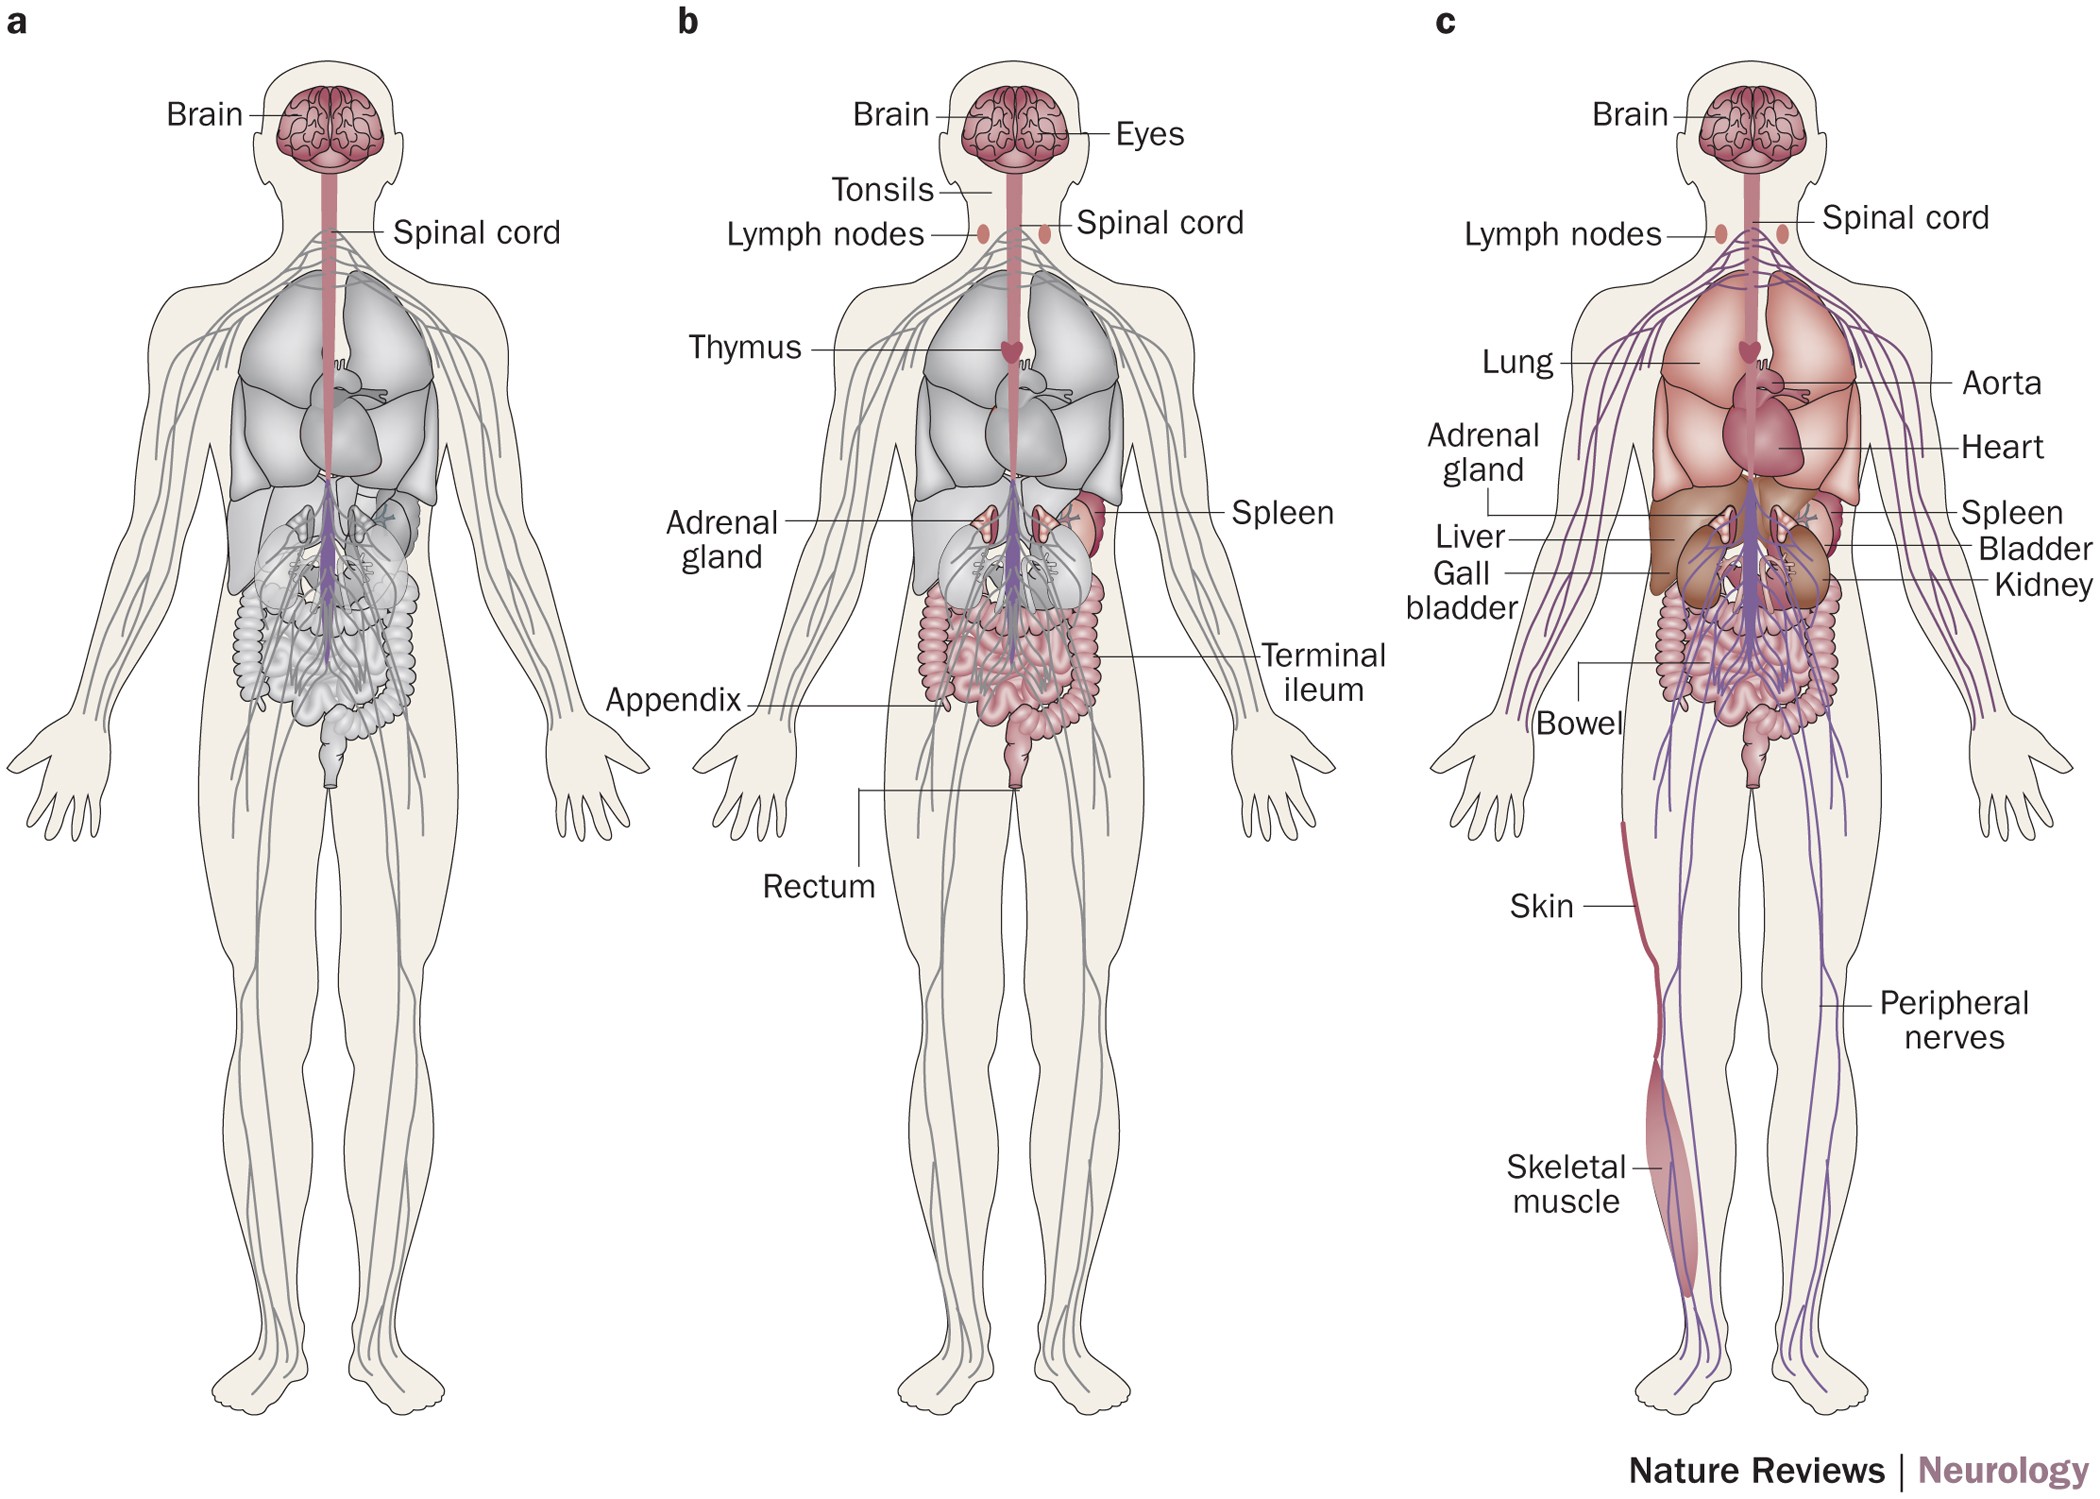 Detection of Prions in a Cadaver for Anatomical Practice